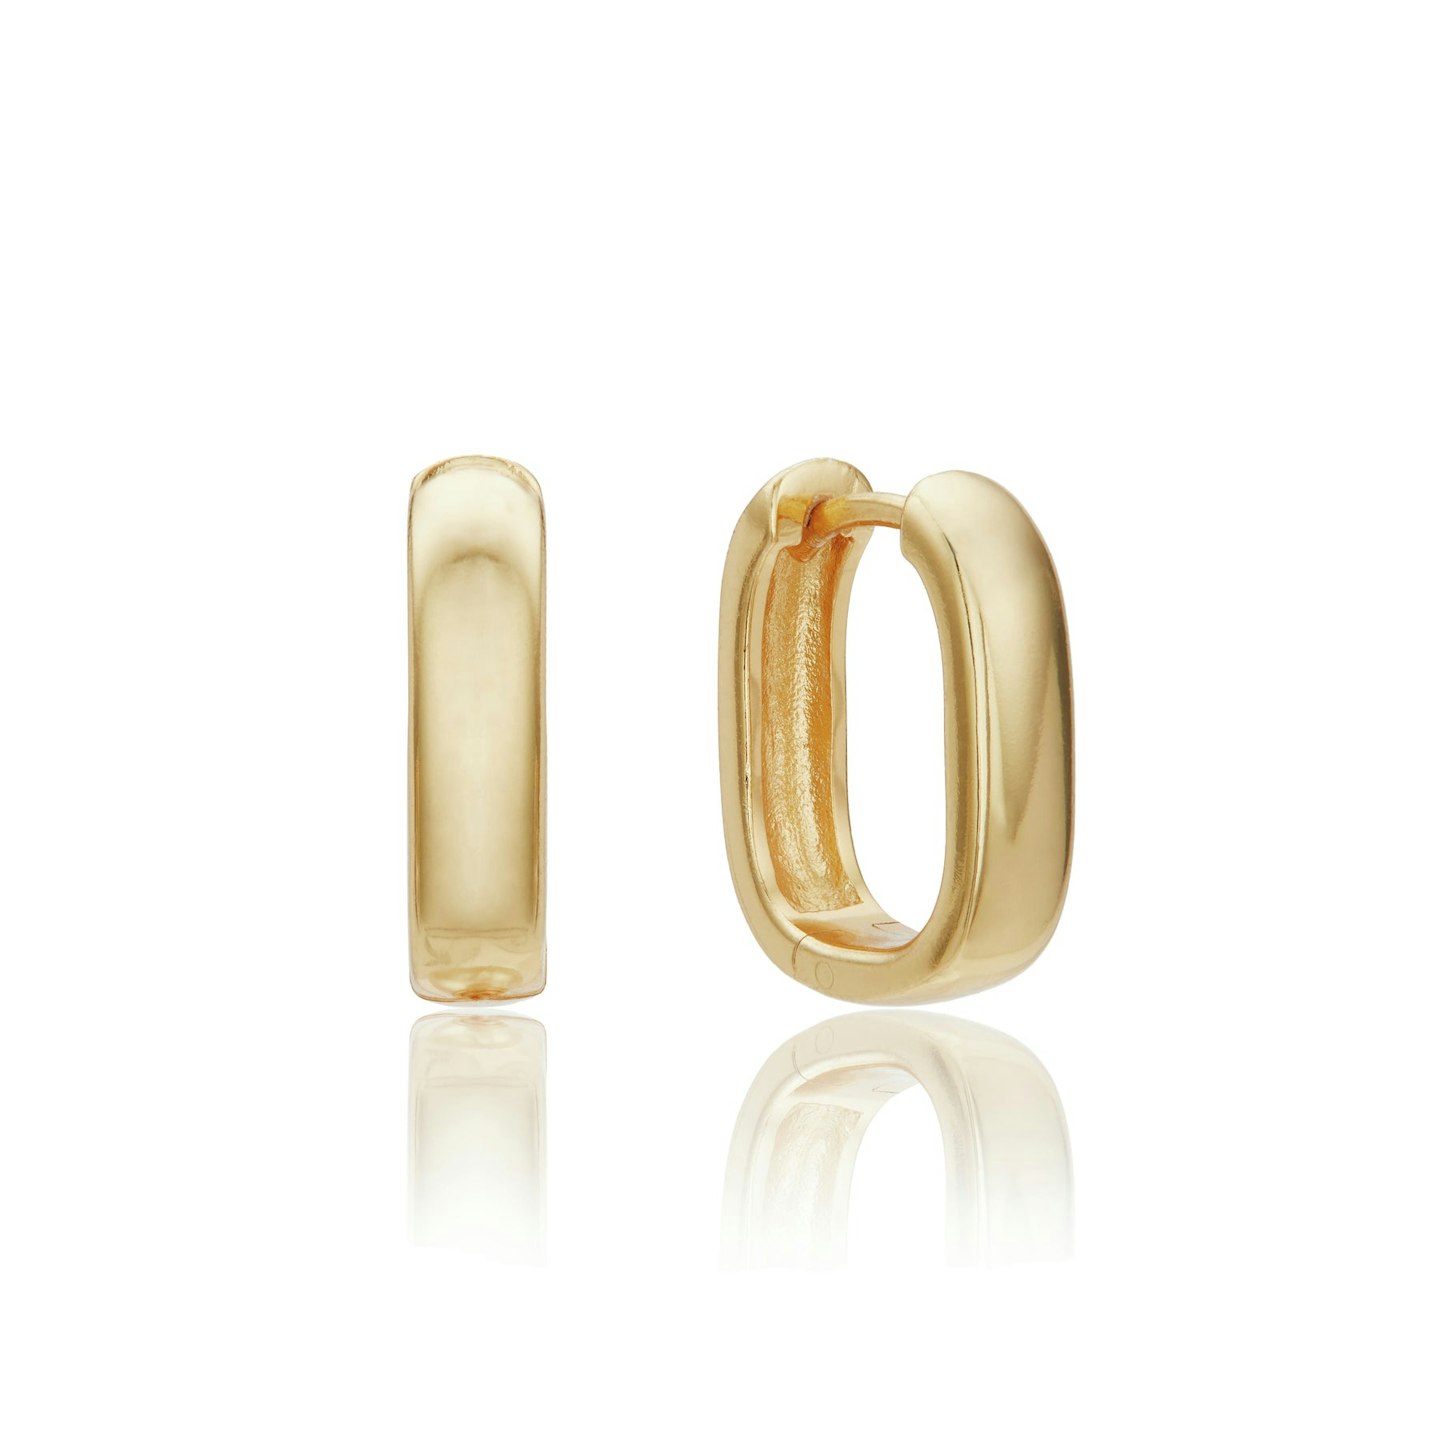 Lunchtime Shop Tuesday - Lily & Roo, Gold Thick Squared Hoop Earrings, £90